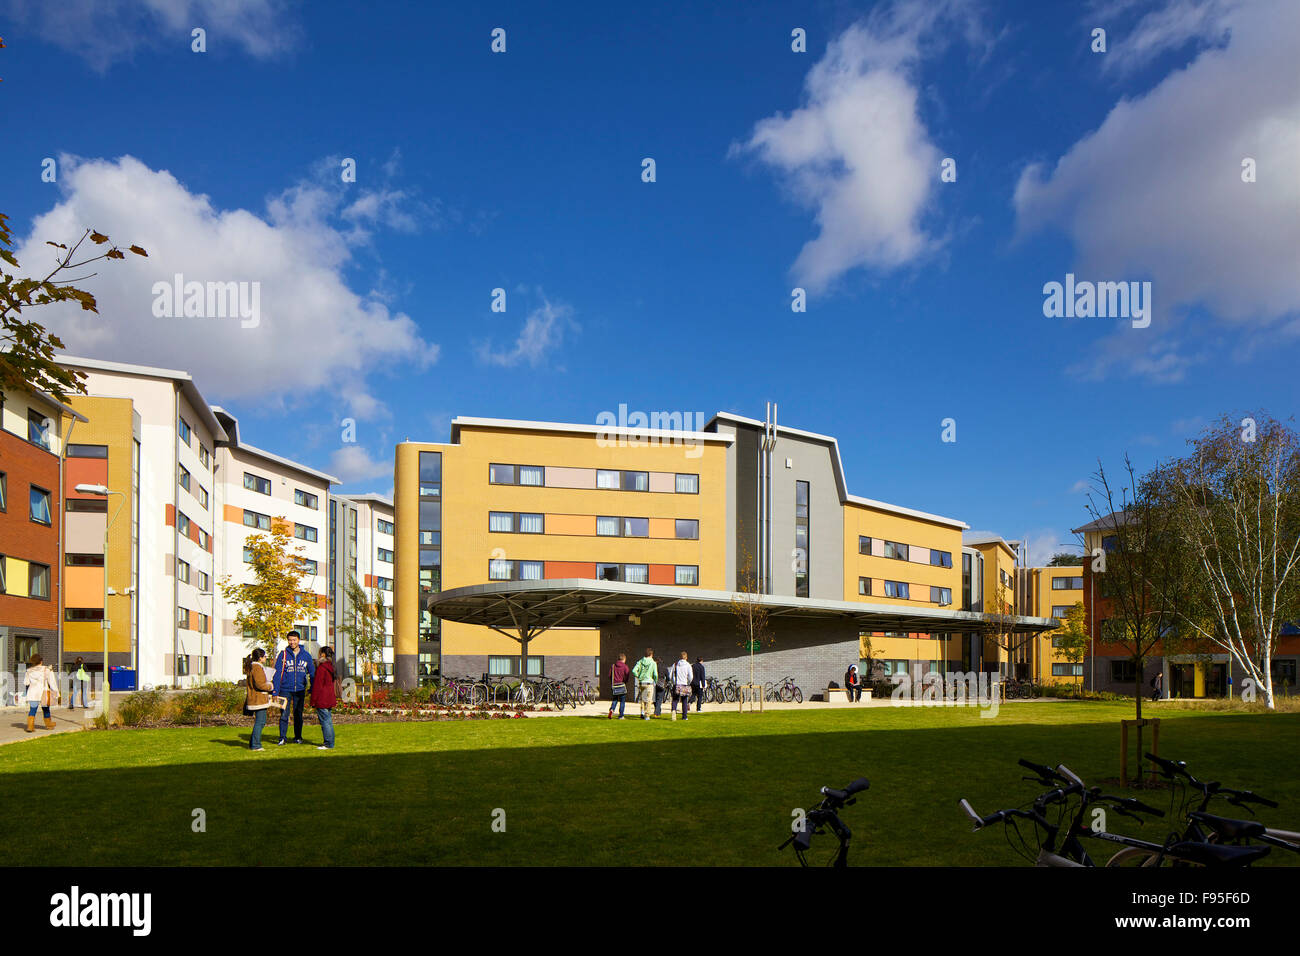 Mackinder and Stenton halls of residence, University of Reading, Berkshire. View of residential halls with students walking around. Lawn in front of the buildings. Stock Photo